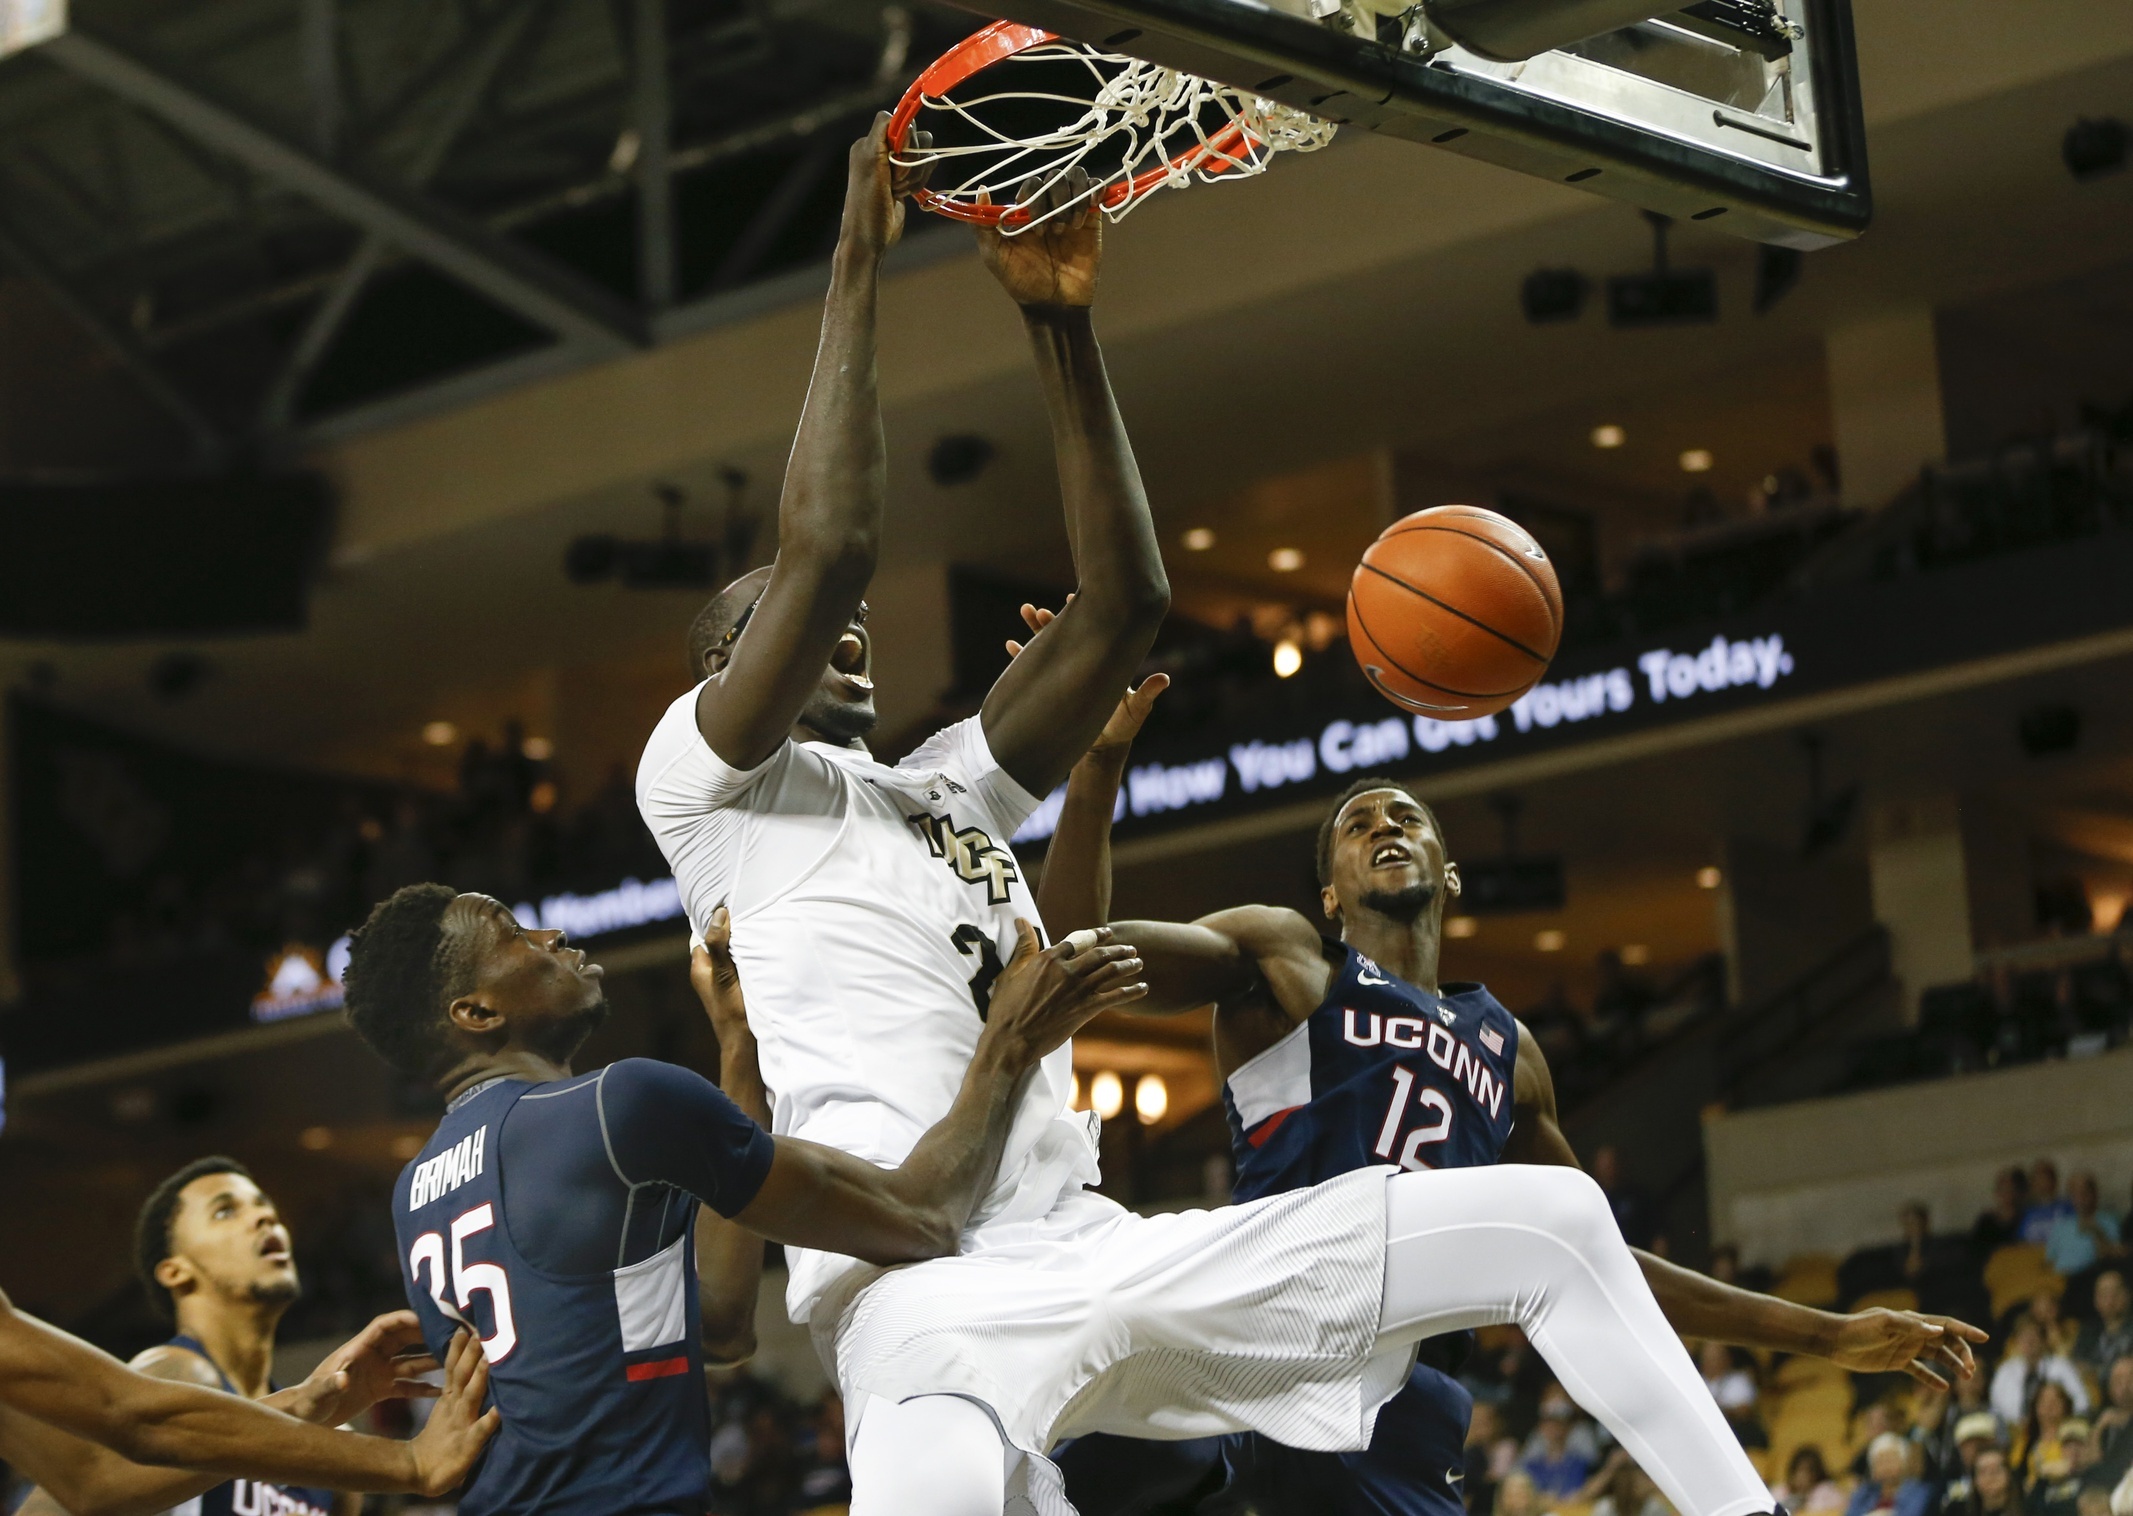 Can UCF's Seven-Foot-Six Giant Tacko Fall Develop into an Offensive Force? - VICE Sports